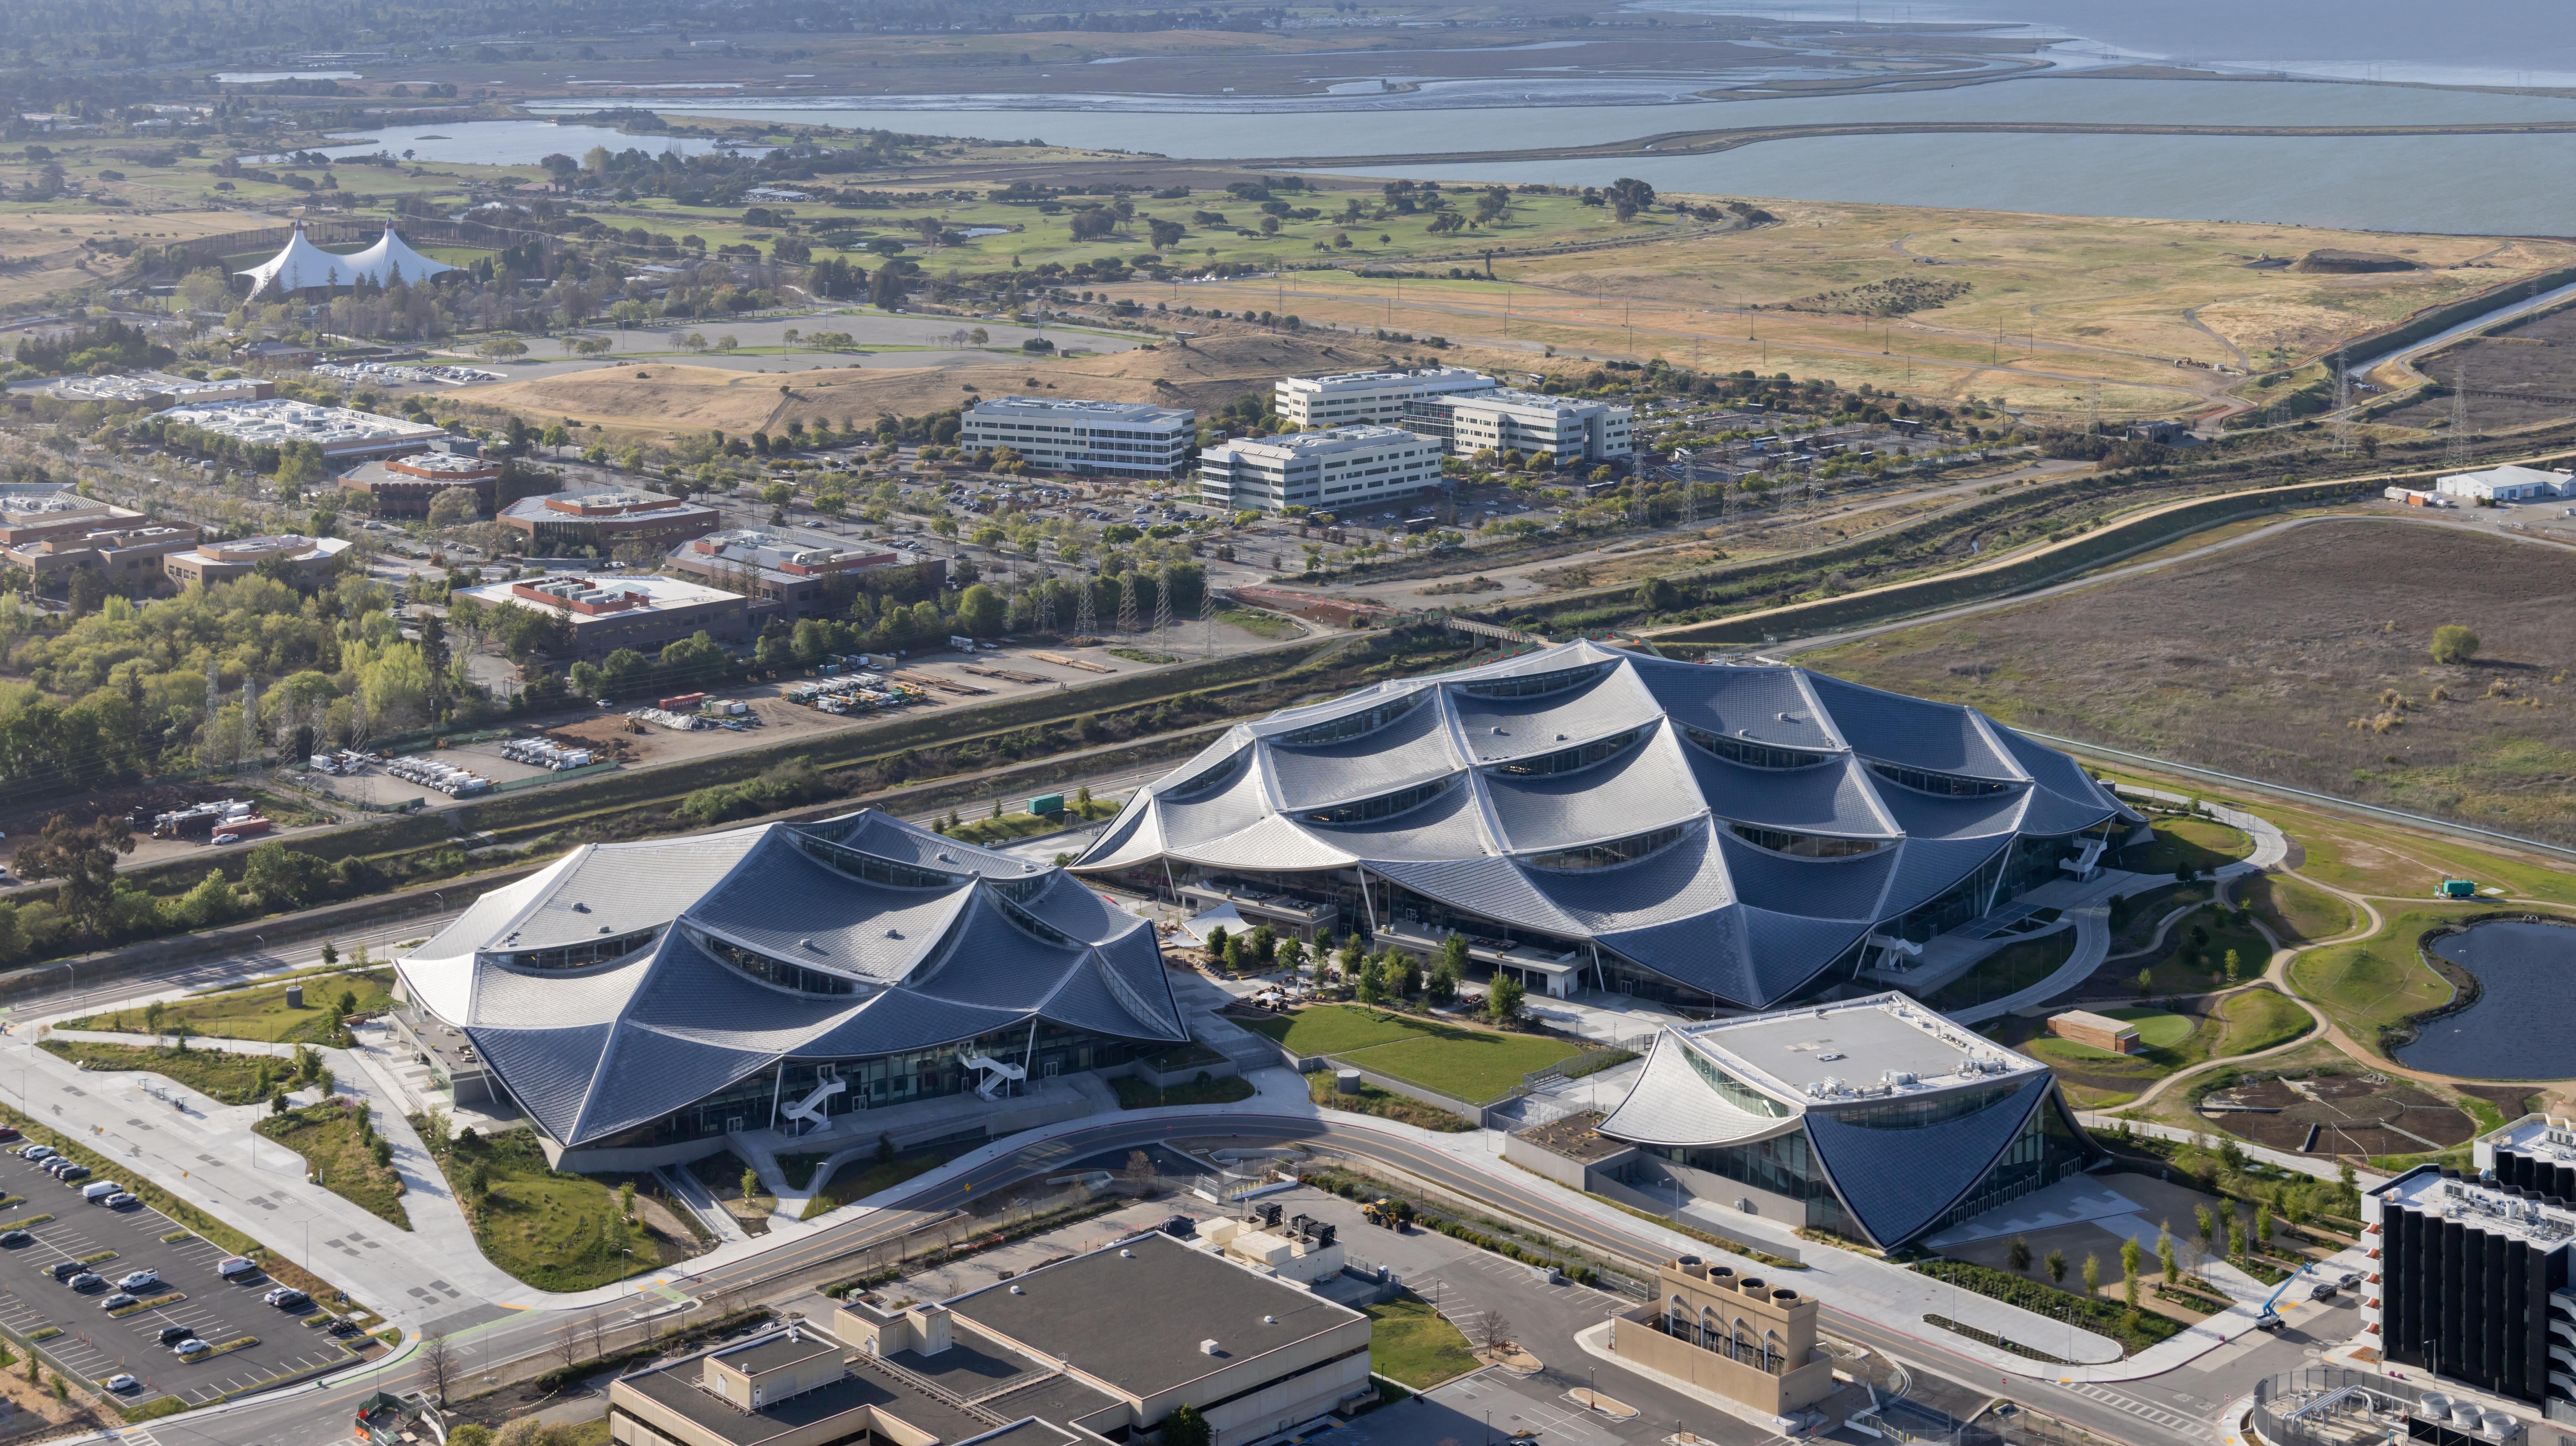 10 Photos of Google’s Massive New Campus With ‘Dragonscale’ Solar Panels